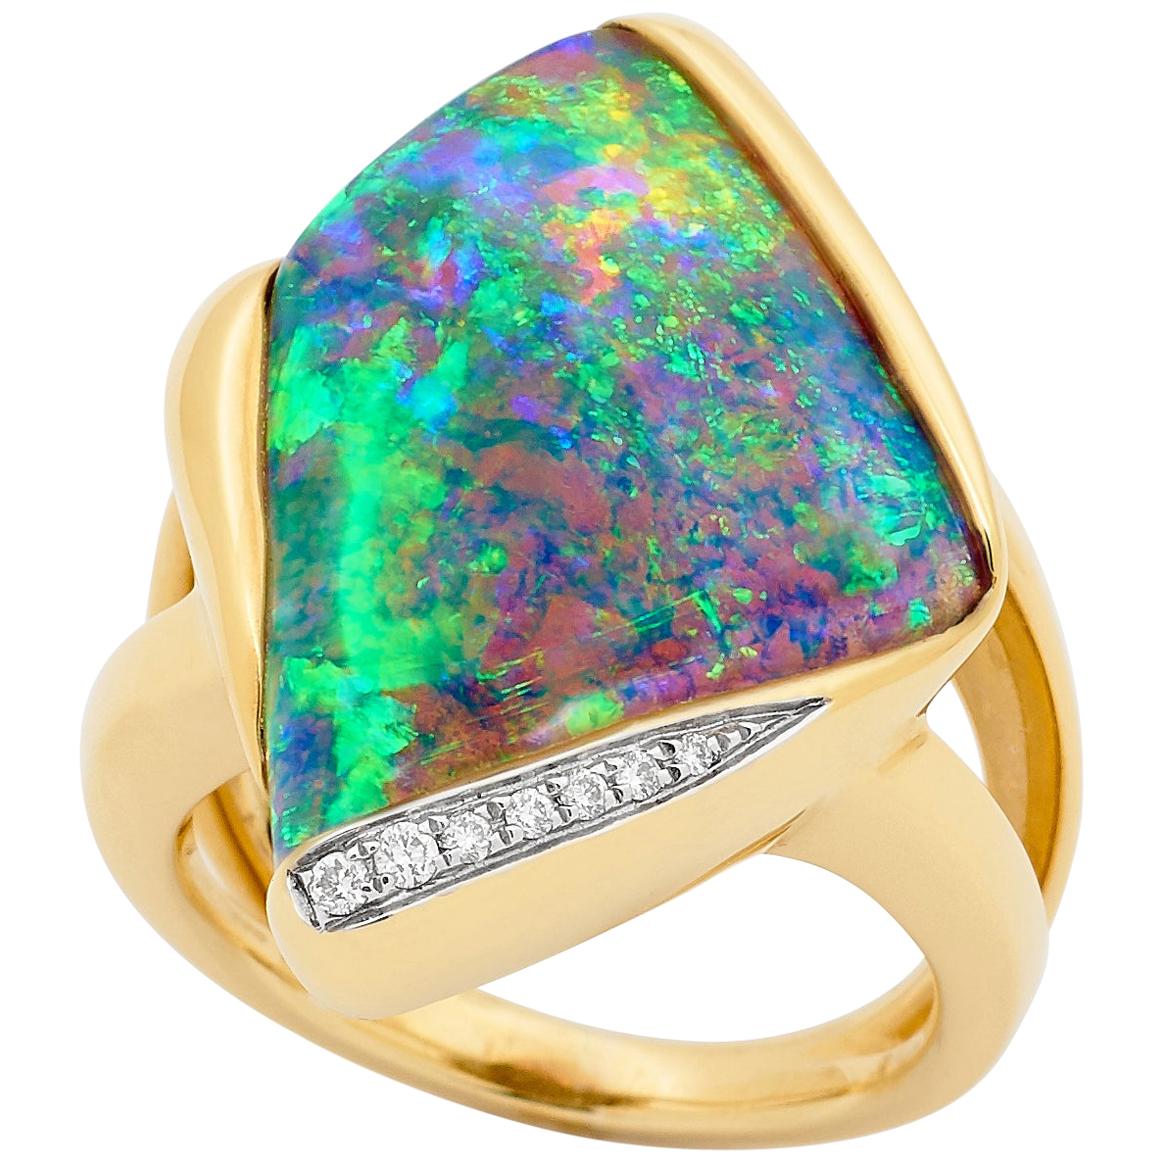 Australian Natural Untreated 17.53ct Pipe Opal Diamond Cocktail Ring 18K Gold